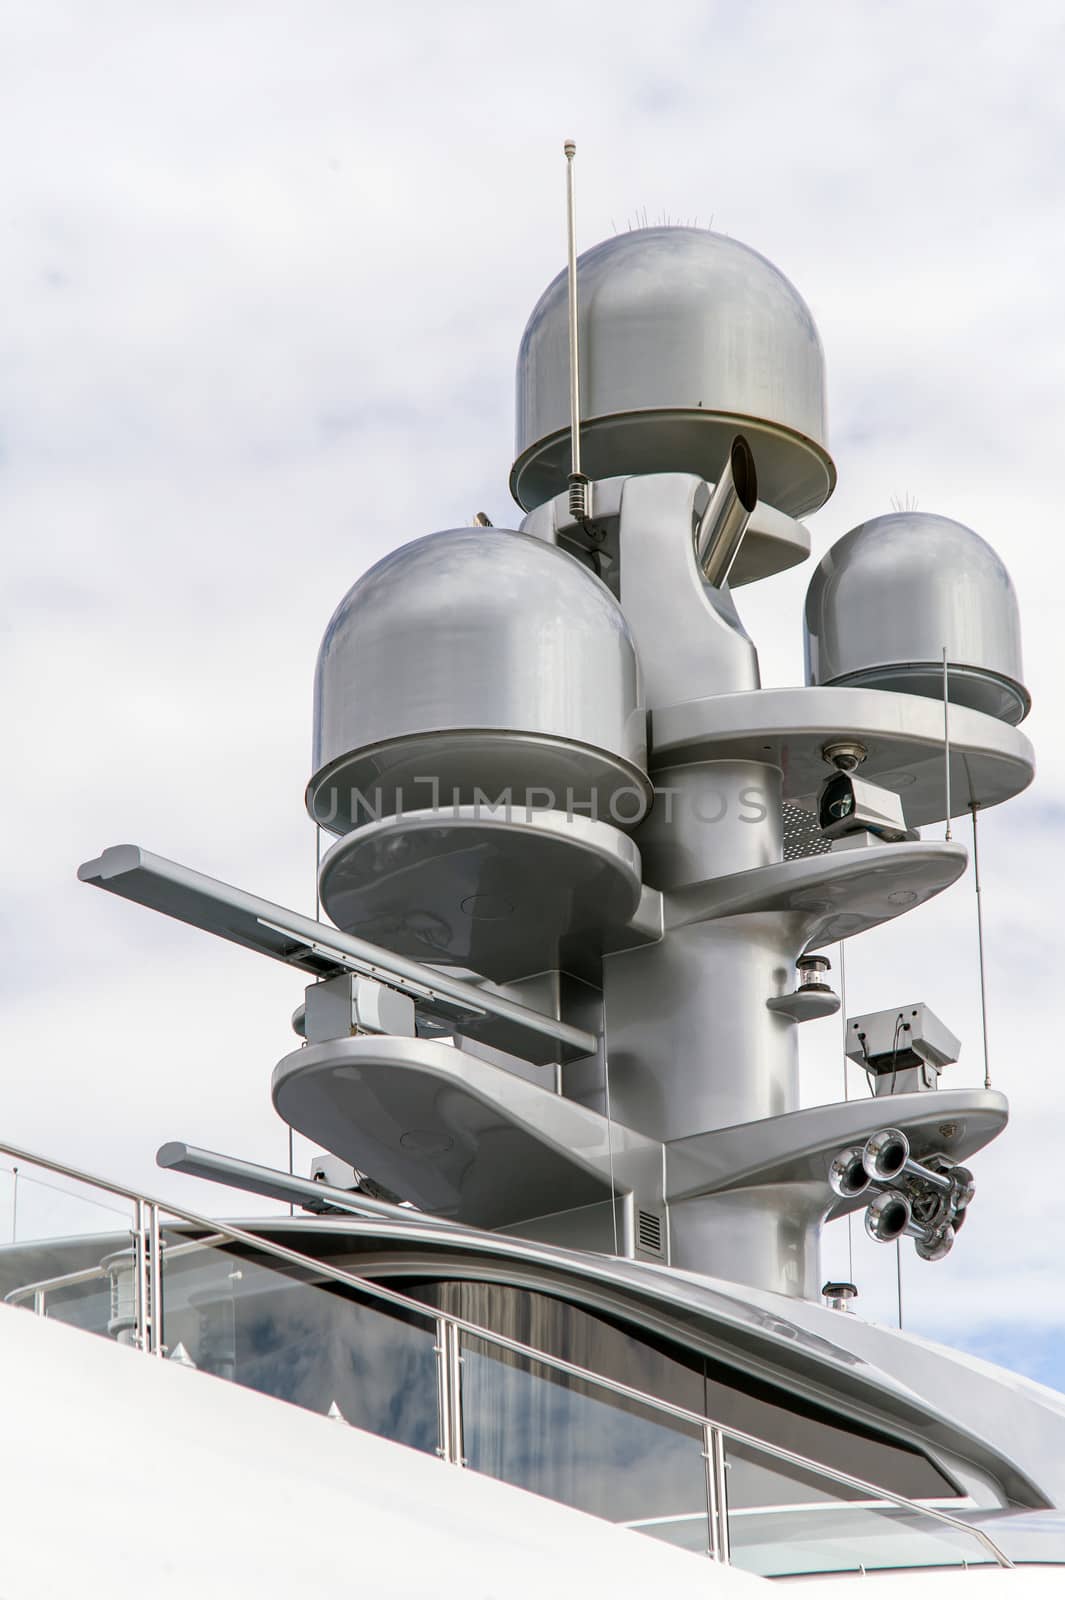 Radar and communication tower on a yacht